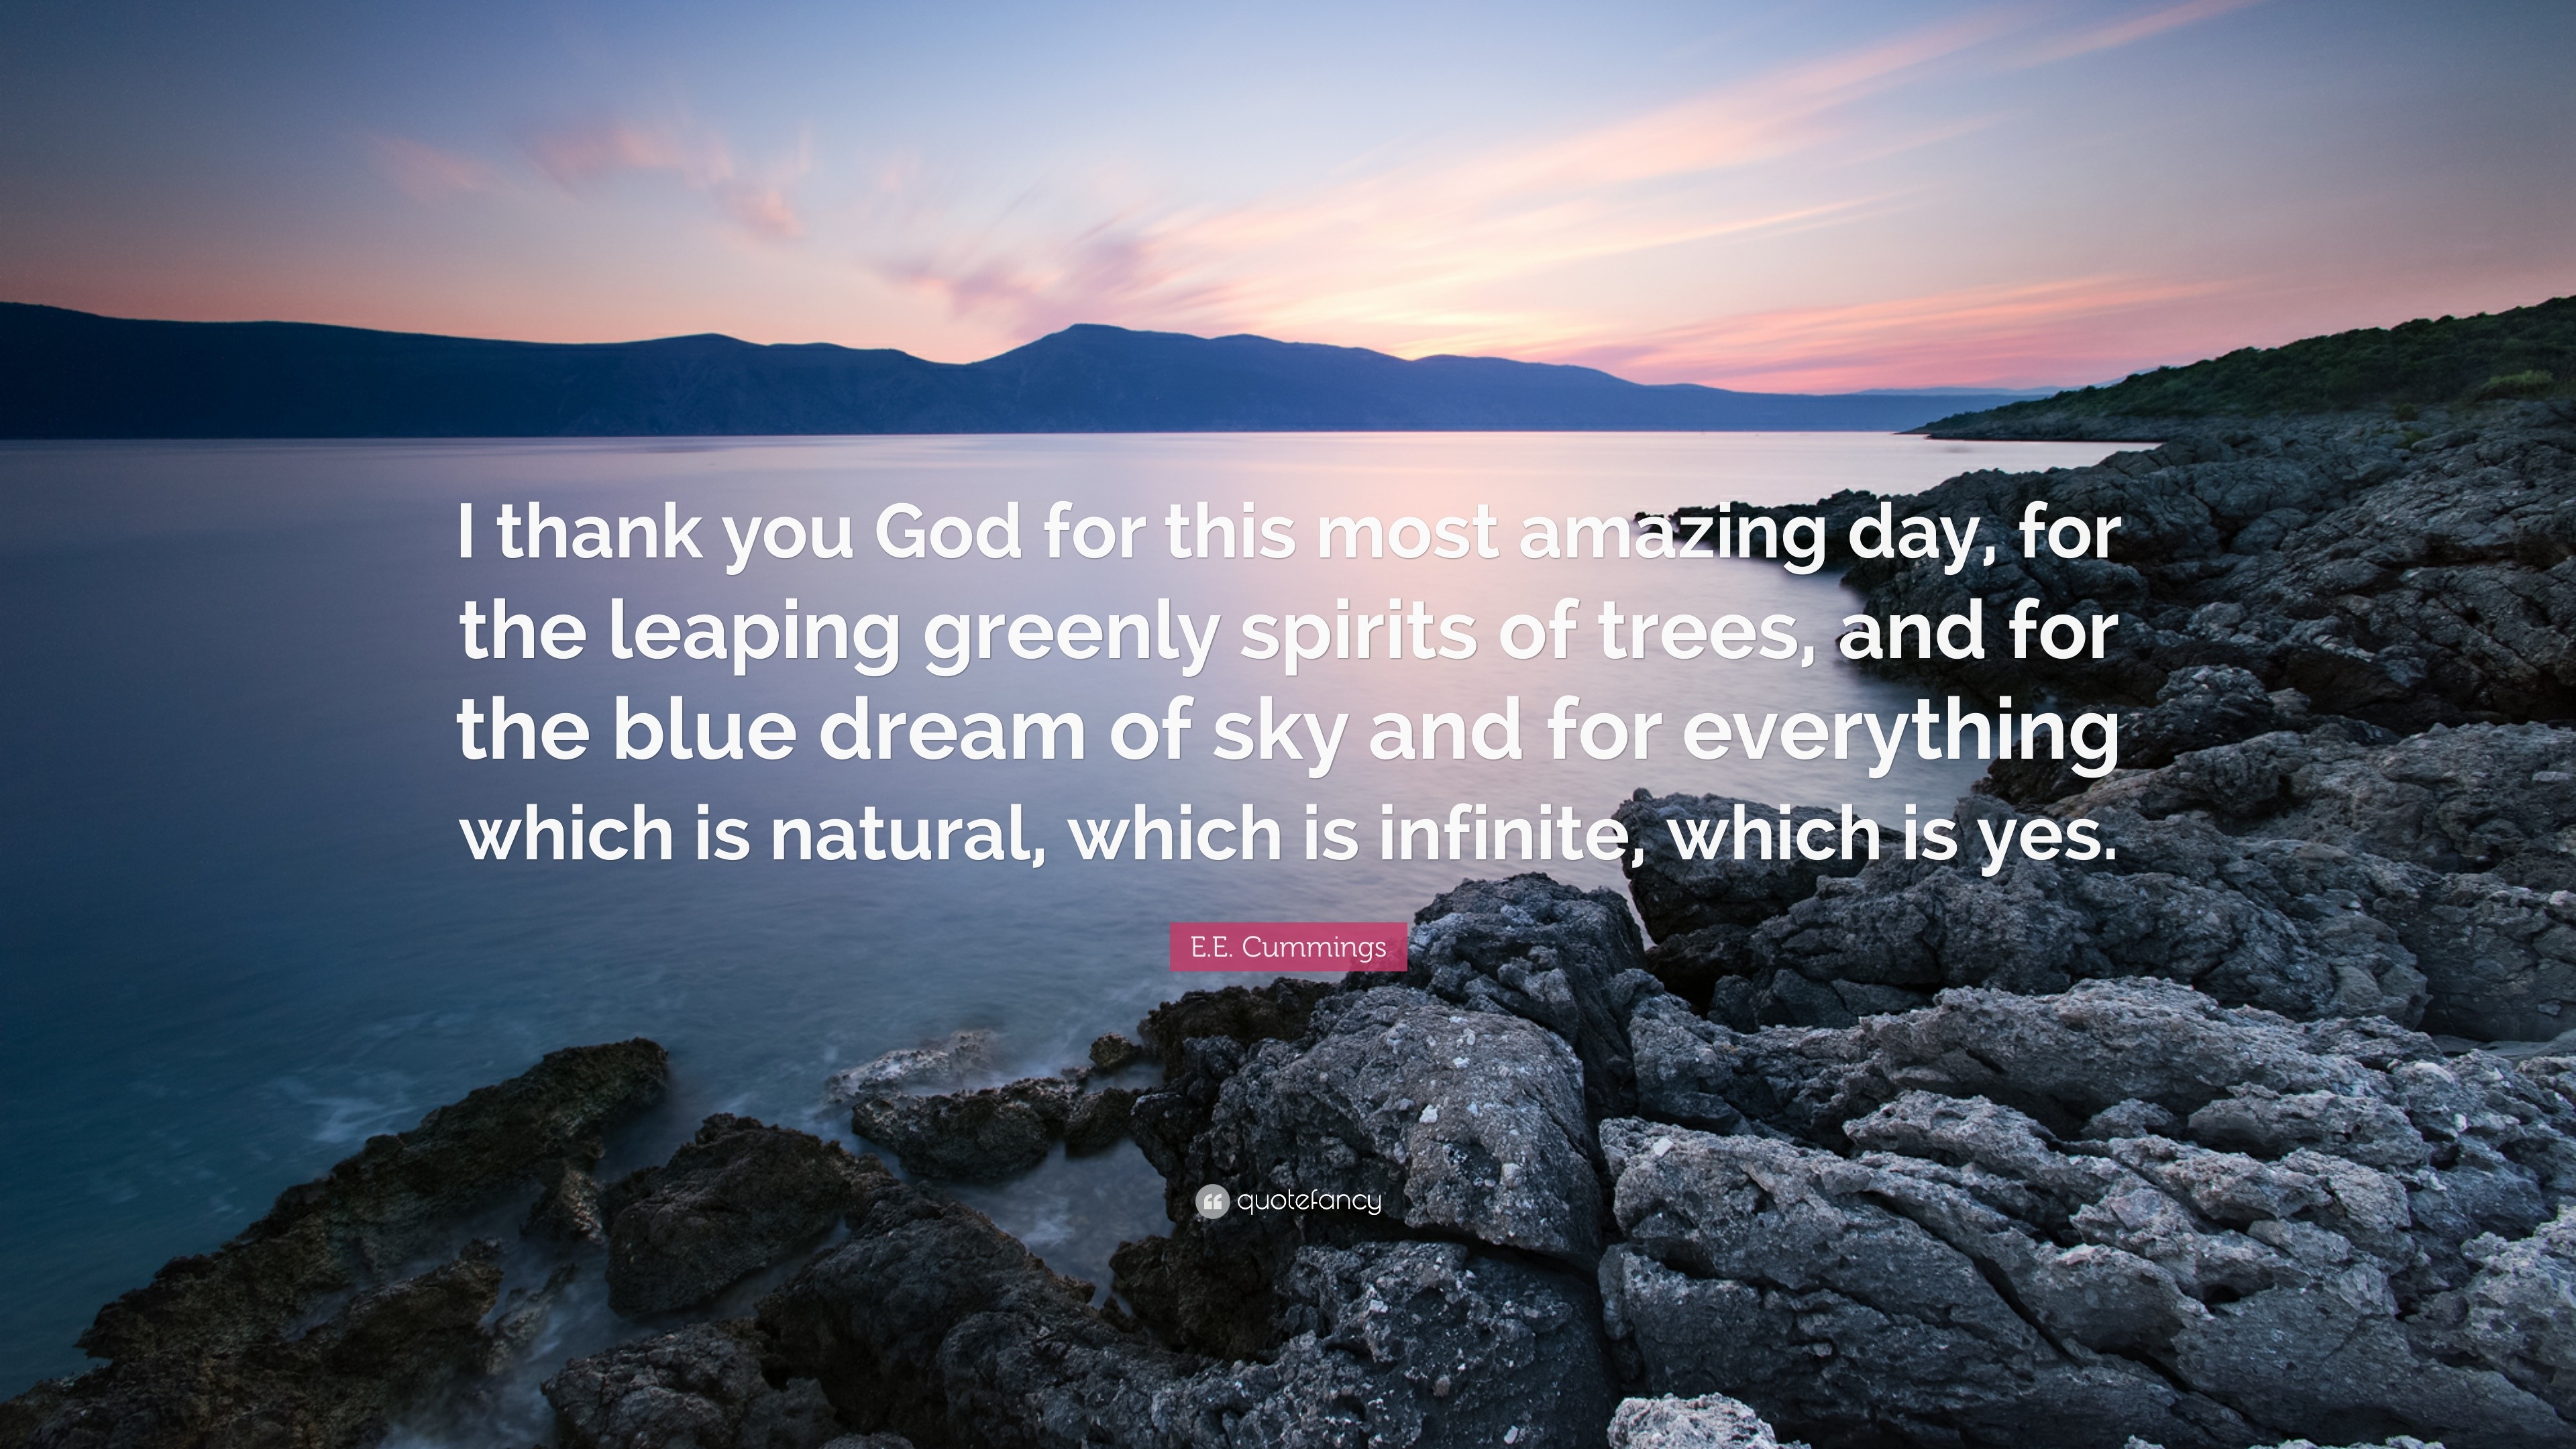 E E Cummings Quote I Thank You God For This Most Amazing Day For The Leaping Greenly Spirits Of Trees And For The Blue Dream Of Sky And F